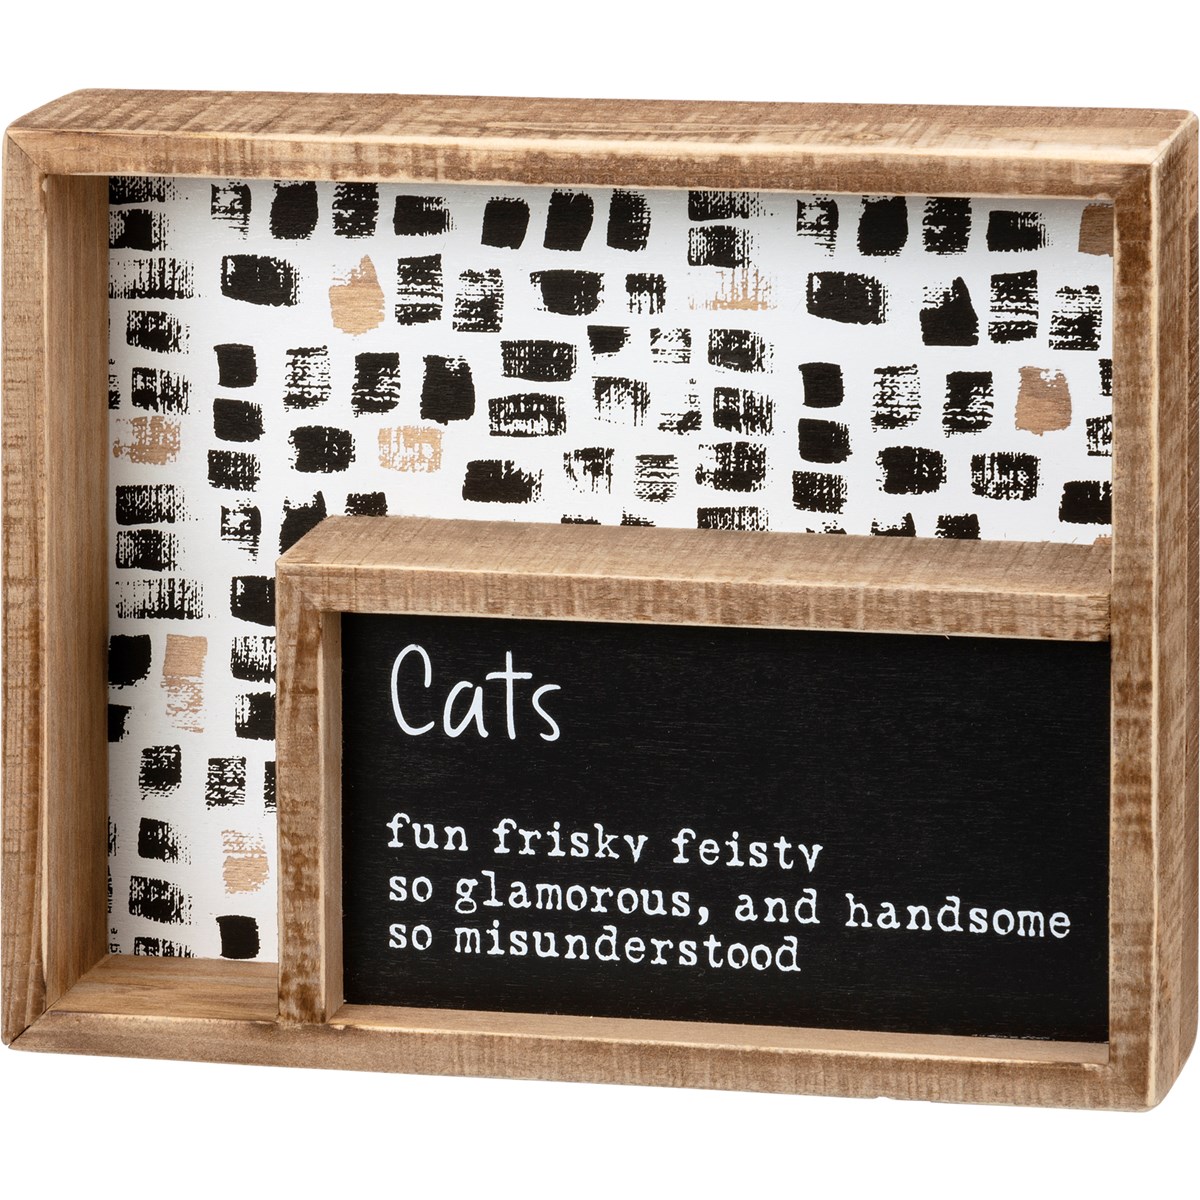 Cats Fun Frisky Feisty Inset Box Sign - Wood